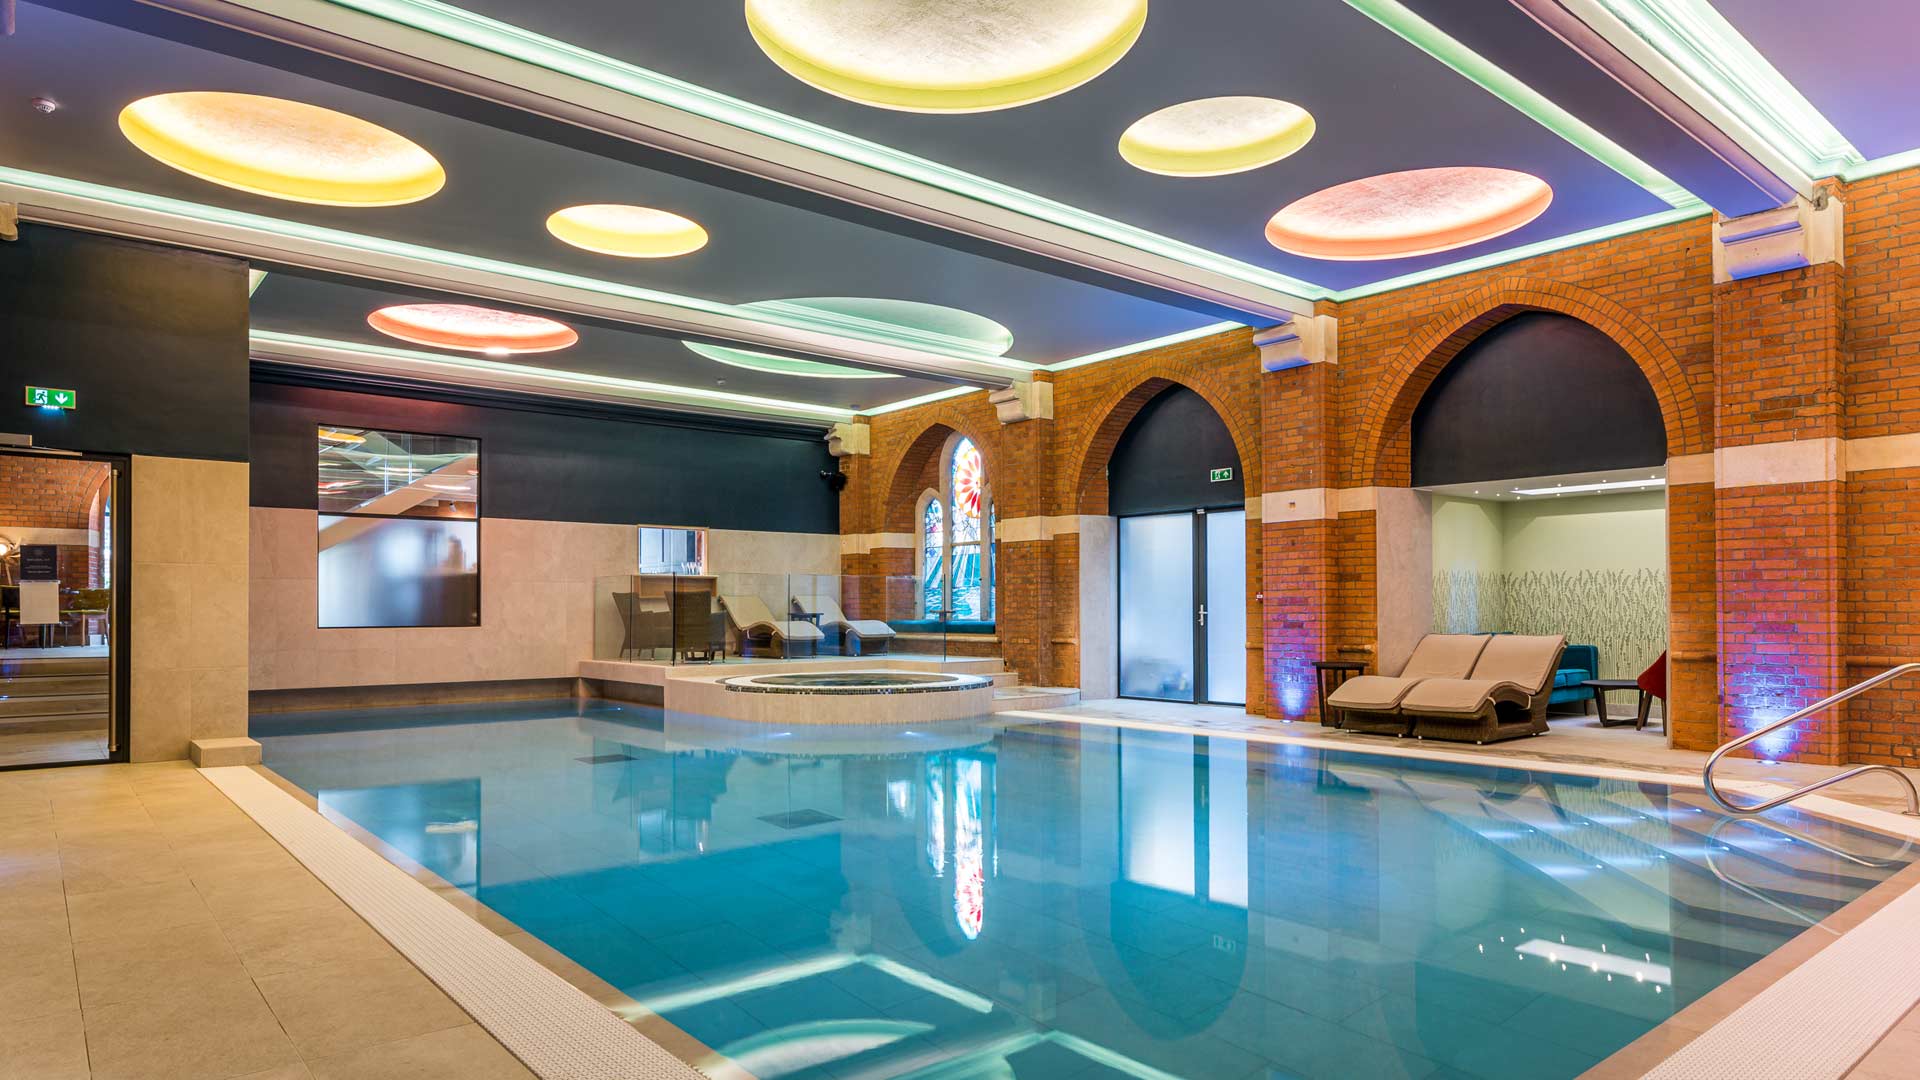 Bright and colourful wellness pool and spa area constructed in the church basement.